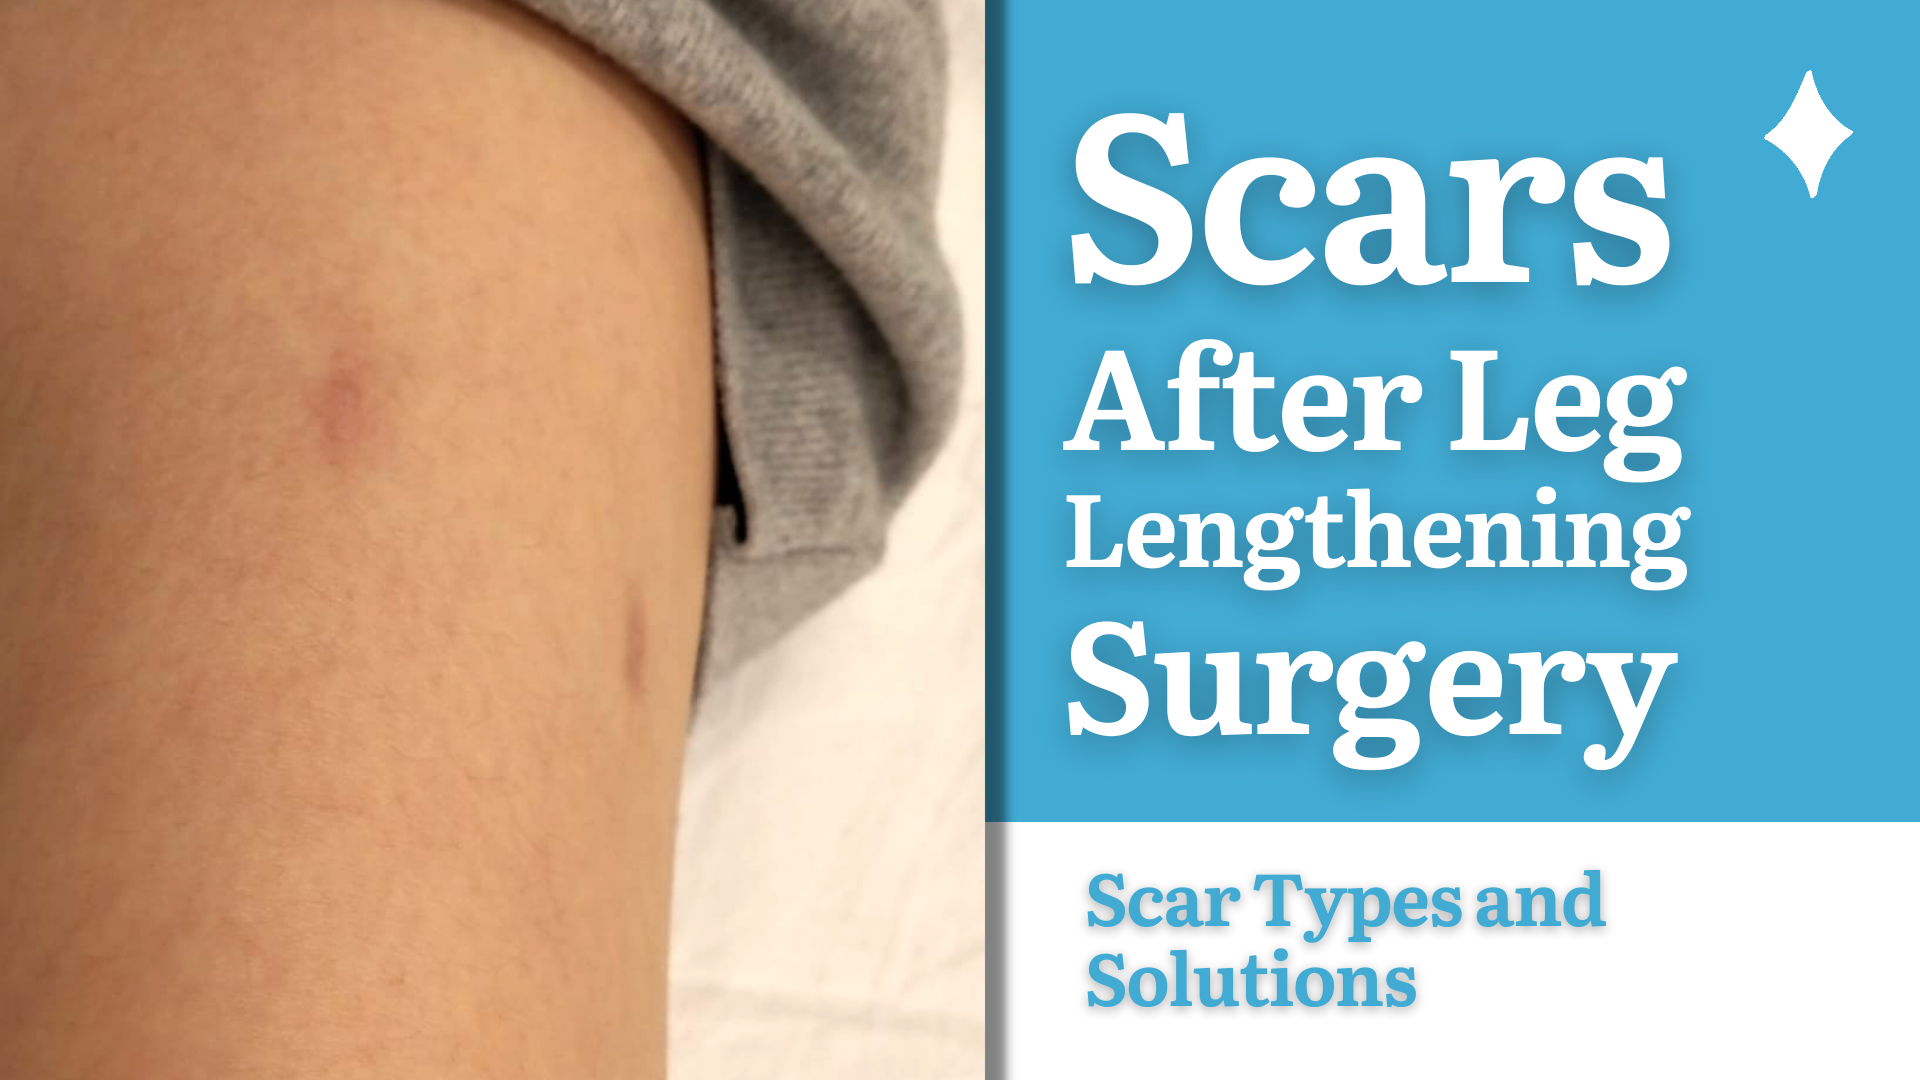 Scars after Leg Lengthening Surgery: Scar Types and Solutions